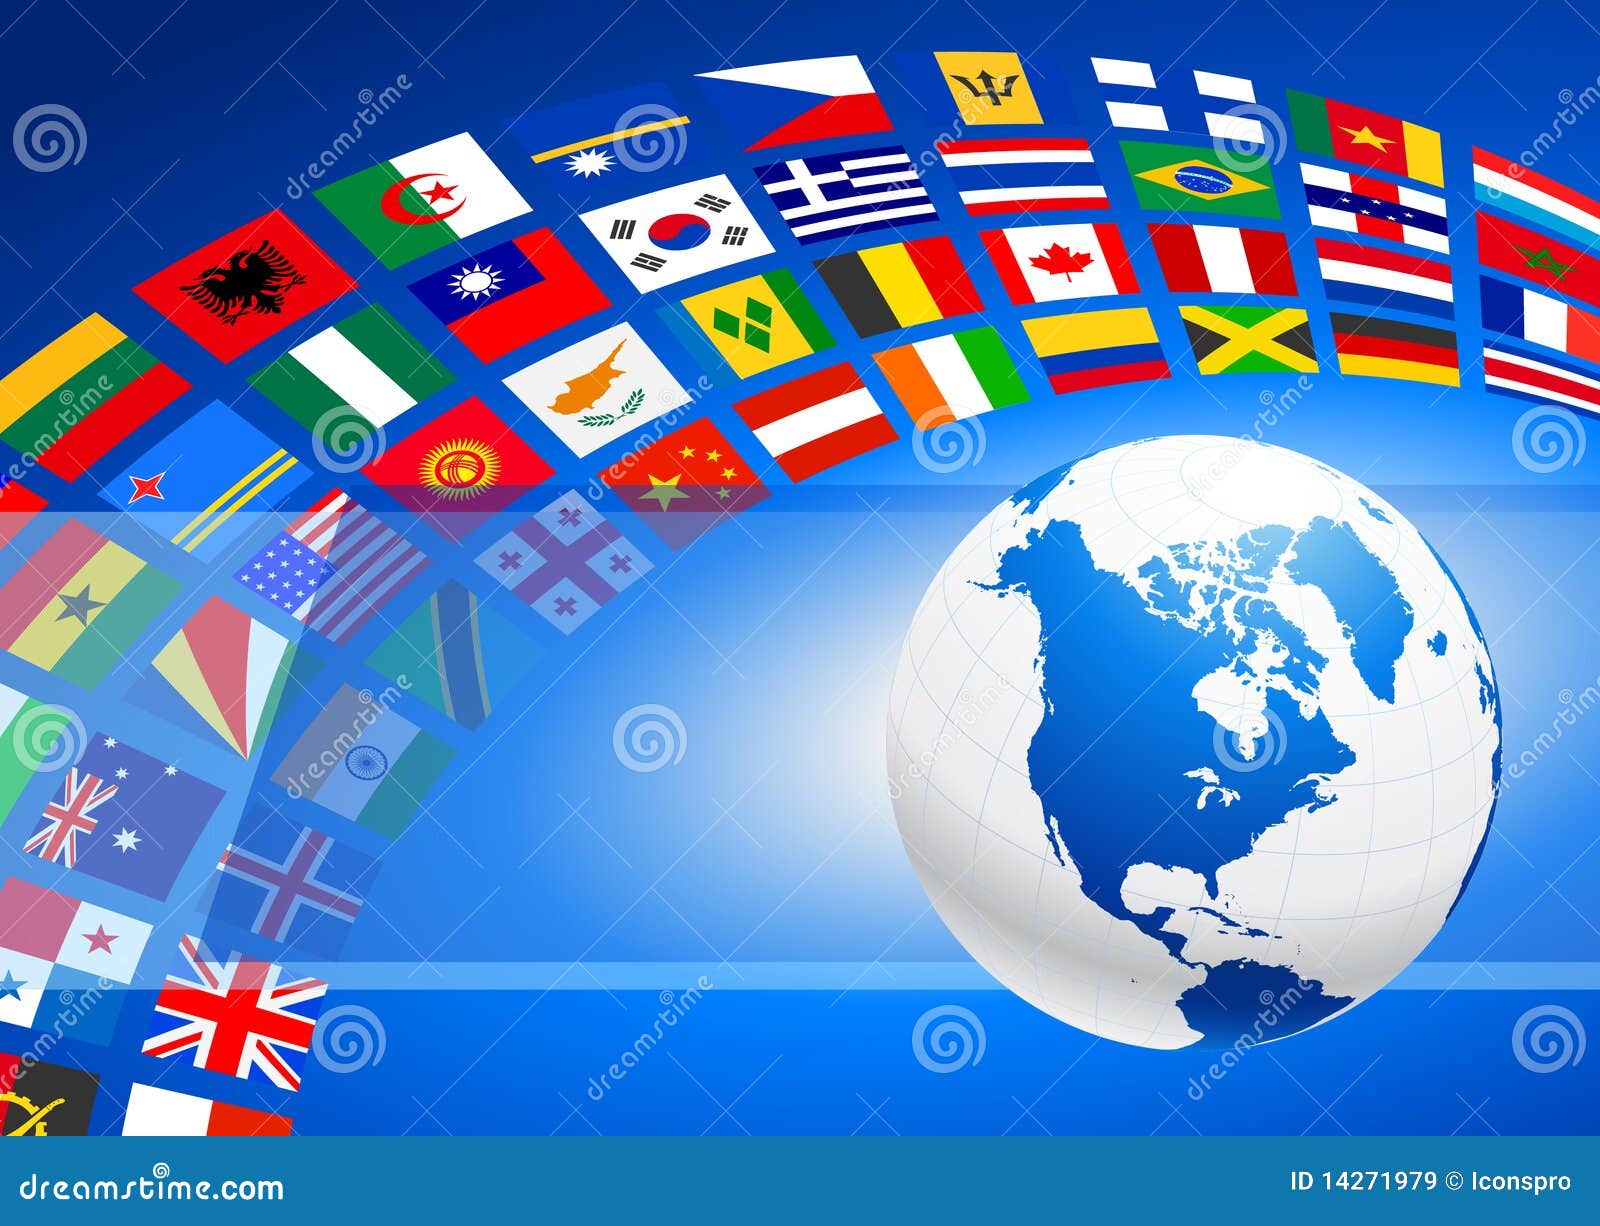 Globe With Many Flag Banner Royalty Free Stock Images - Image: 14271979